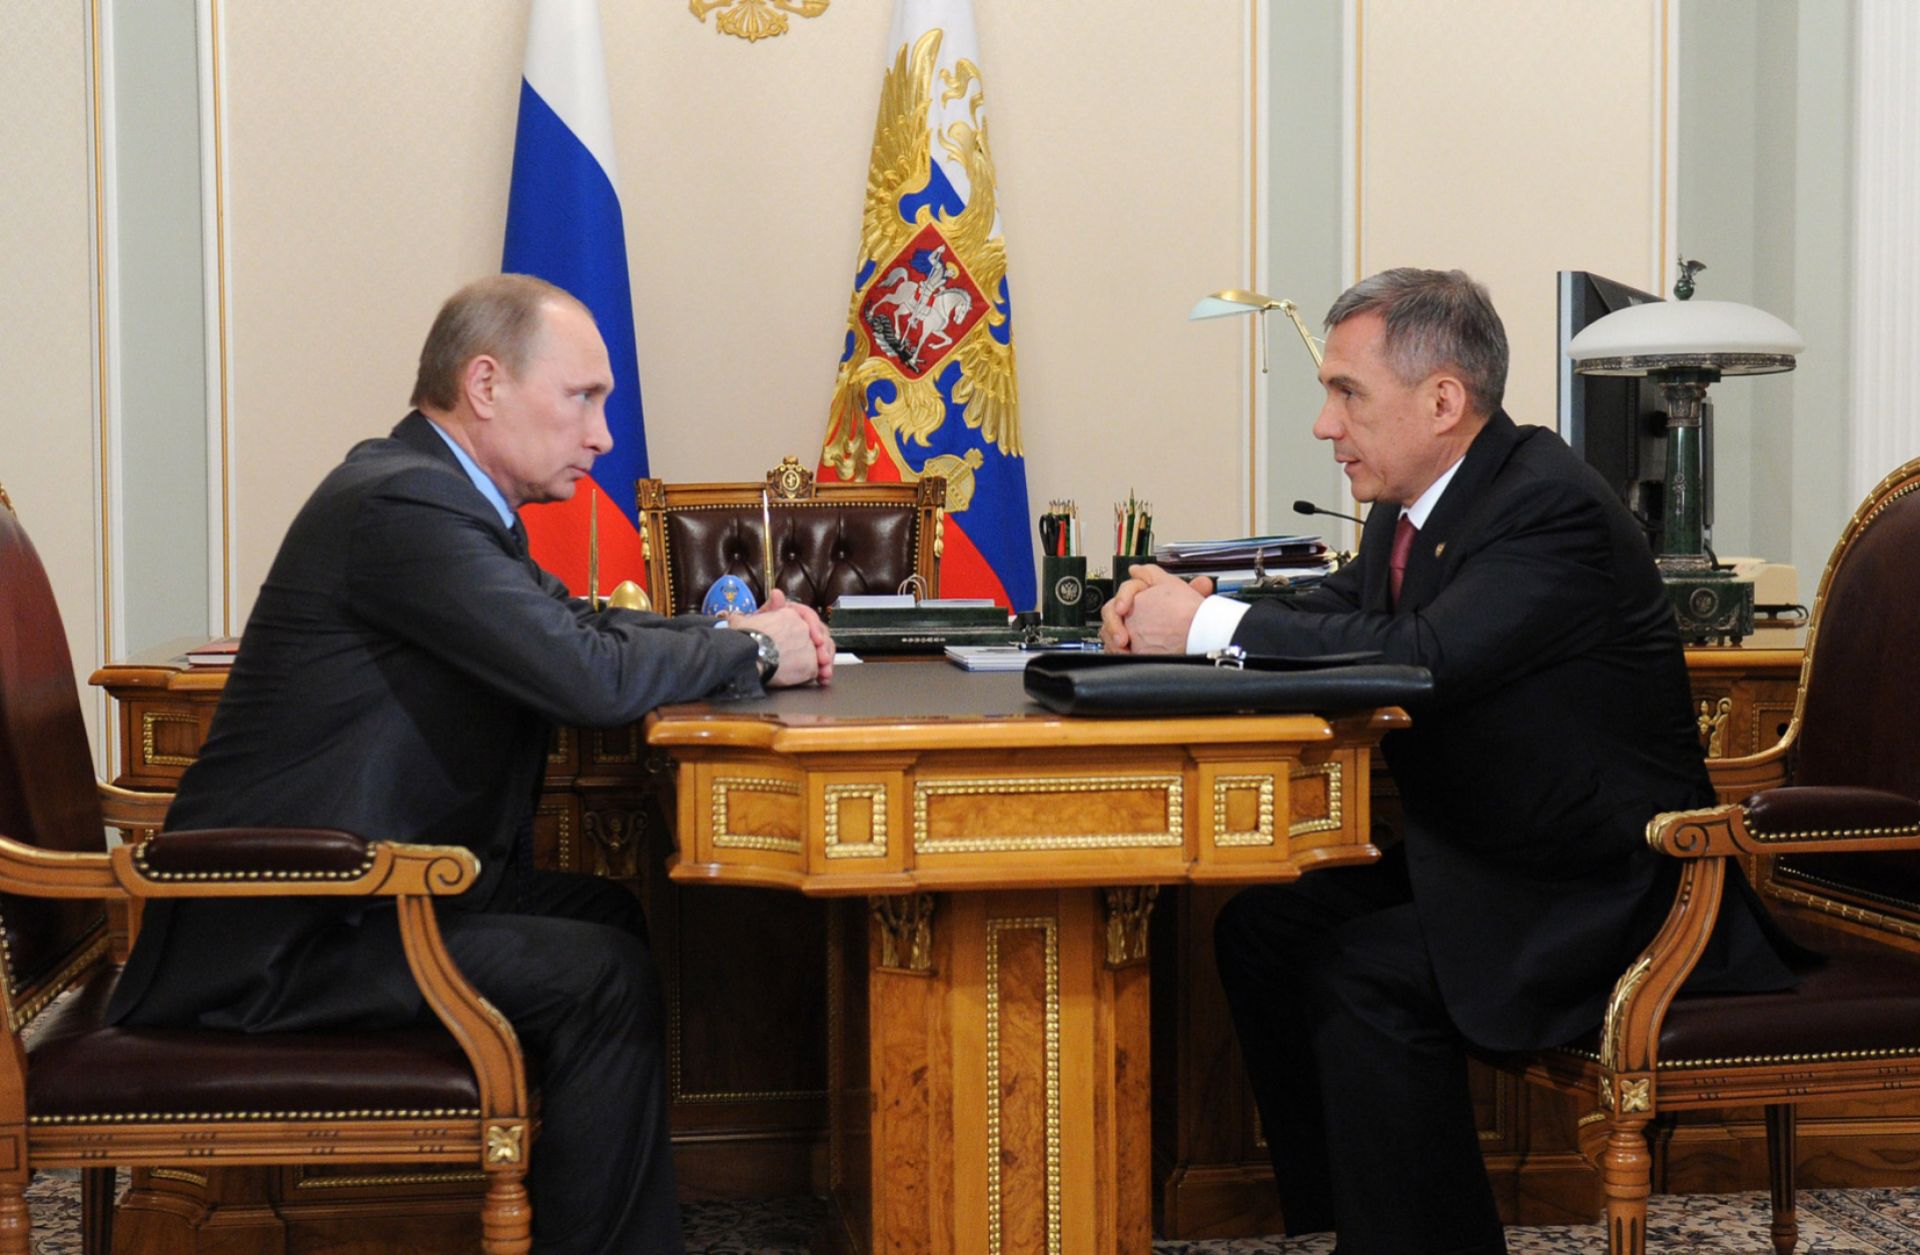 Russian President Vladimir Putin (L) can respond one of two ways to criticism from Rustam Minnikhanov, the leader of Tatarstan: Offer the republic financial concessions or purge the popular outspoken critic of his administration.